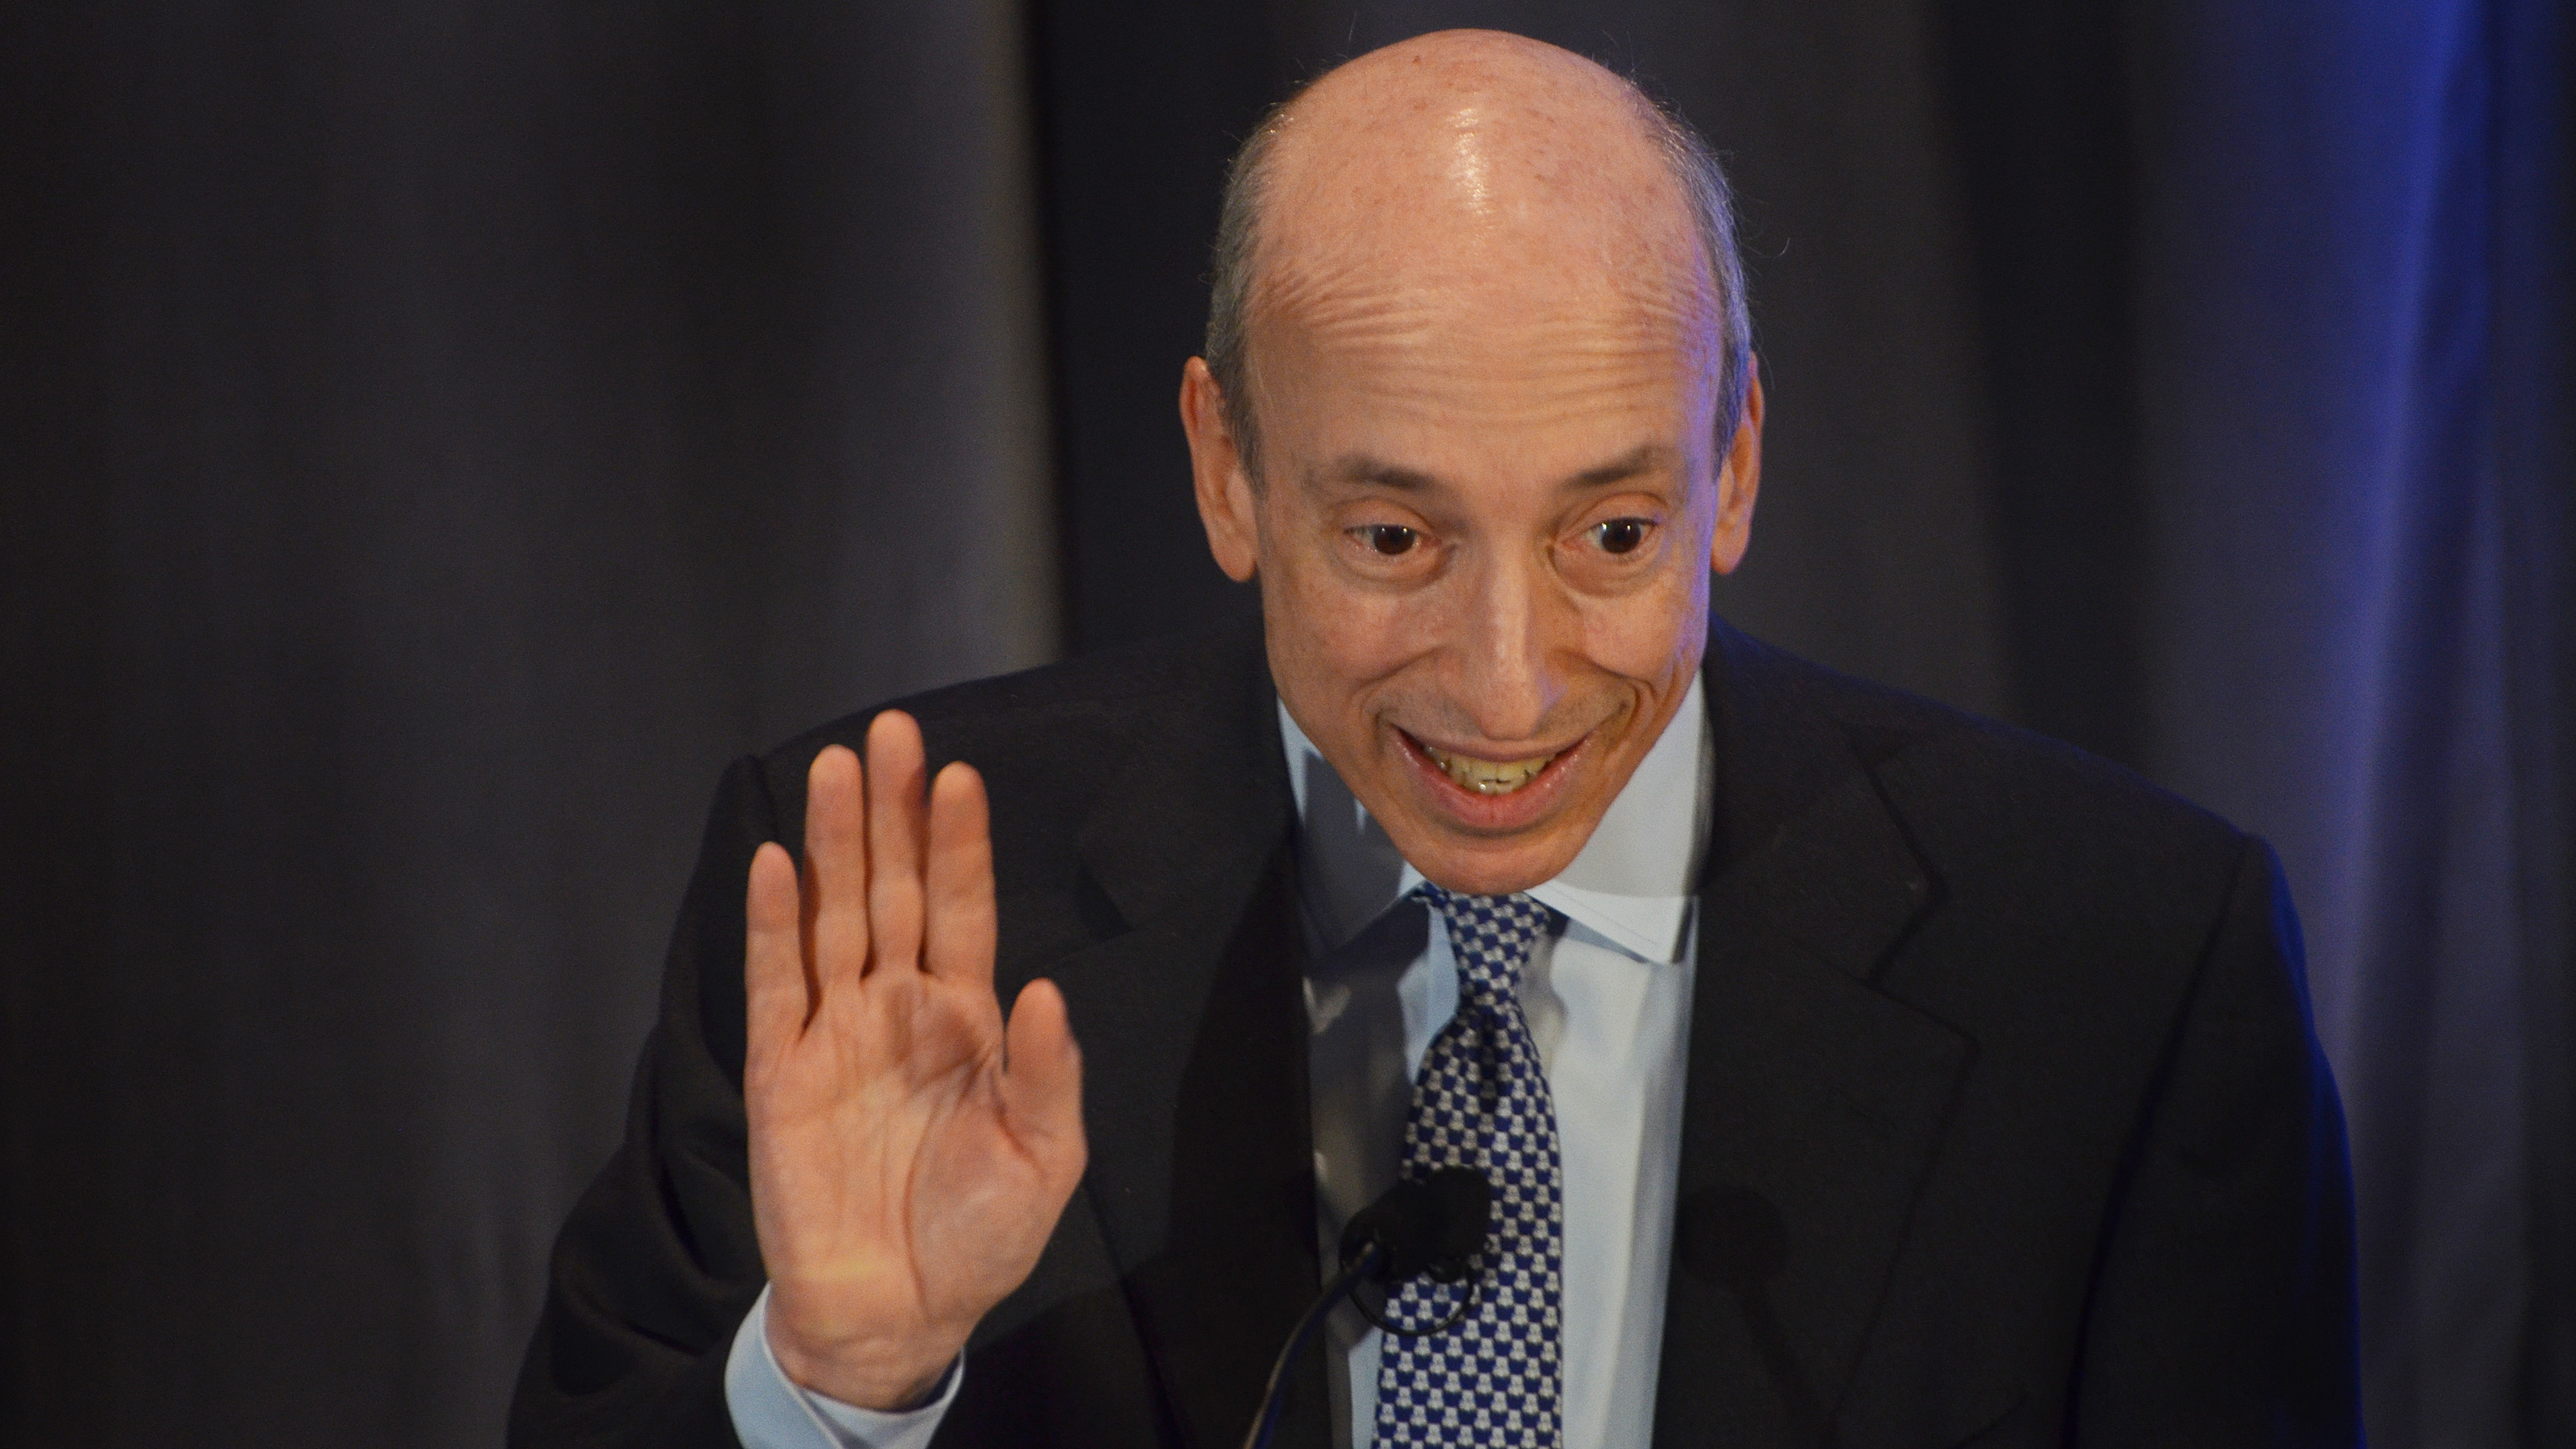 The SEC, under Chair Gary Gensler, is likely to decide on a spot bitcoin ETF in coming days. (Jesse Hamilton/CoinDesk)